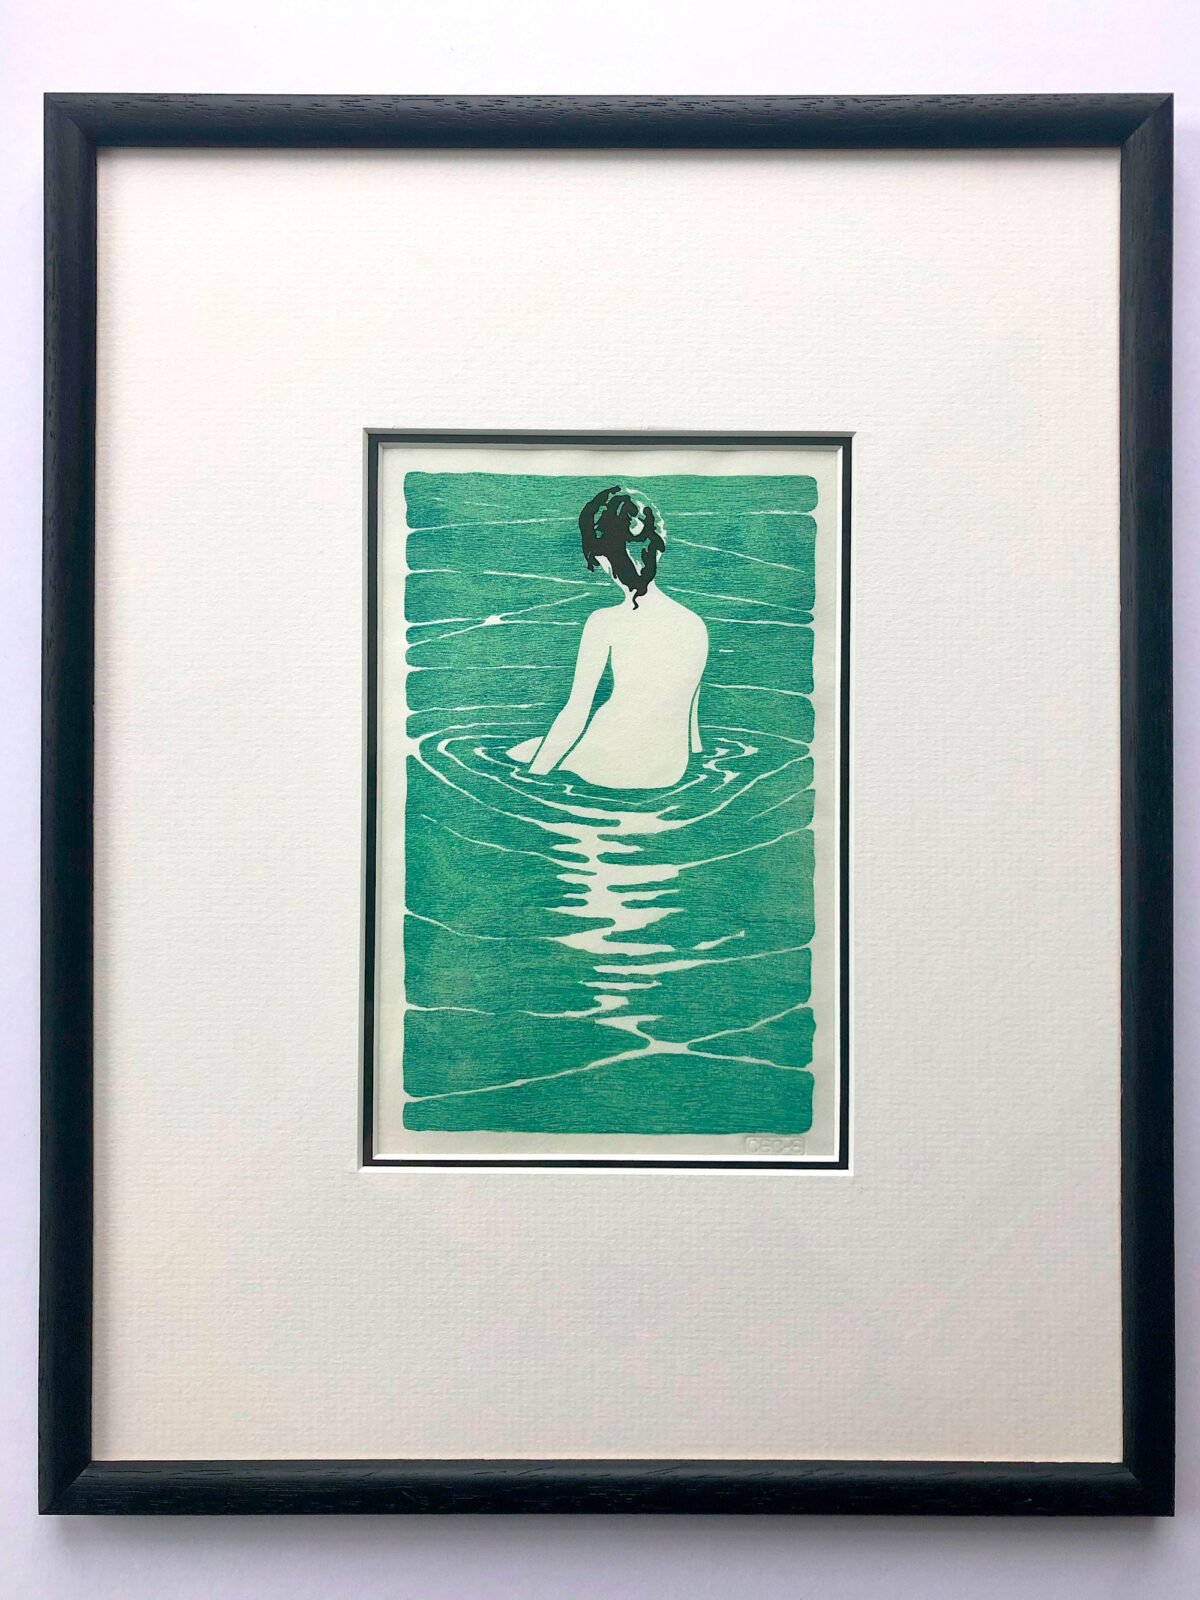 Female Nude, after Narumi woodblock print Claire Cameron-Smith, framed print, thin, black wood frame